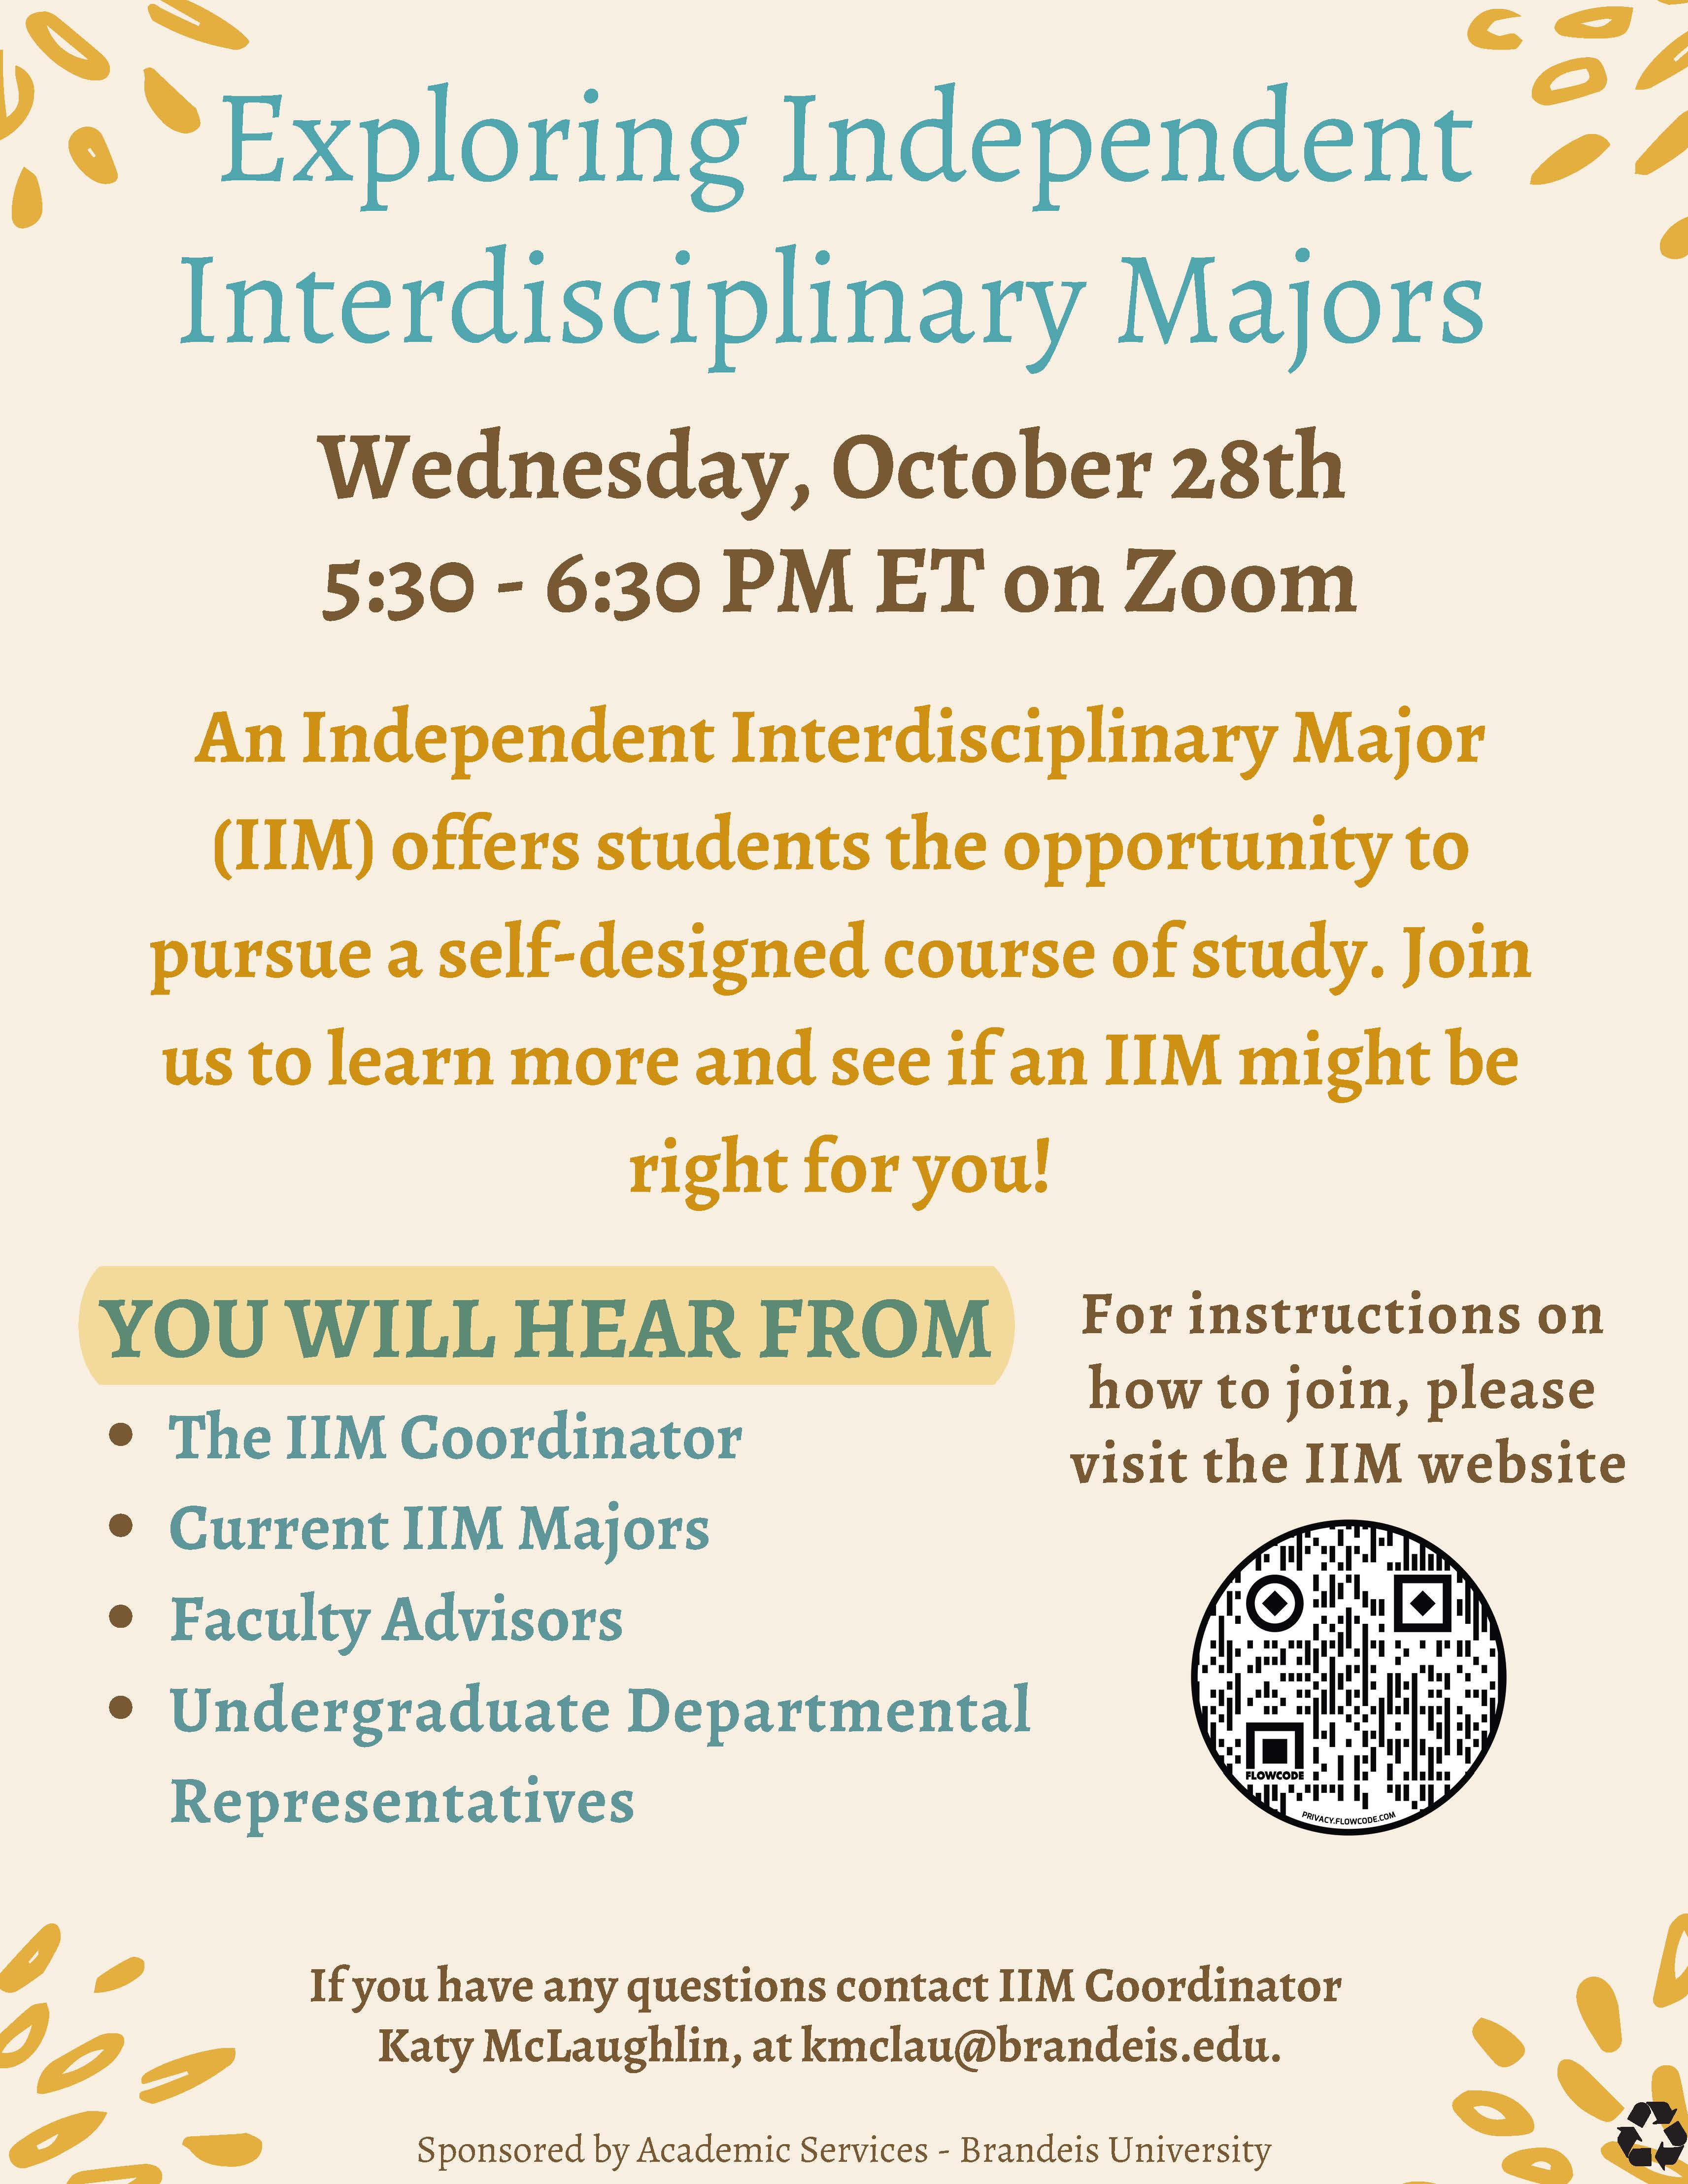 Poster for: Exploring Independent Interdisciplinary Majors, Wednesday, October 28th 5:30 - 6:30 PM ET on Zoom. An Independent Interdisciplinary Major (IIM) offers students the opportunity to pursue a self-designed course of study. Join us to learn more and see if an IIM might be right for you! You wil hear from the IIM Coordinator, Current IIM Majors, Faculty Advisors, Undergraduate Departmental Representatives. If you have any questions contact IIM Coordinator,Katy McLaughlin, at kmclau@brandeis.edu. Sponsored by Academic Services - Brandeis University. For instructions on how to join, please visit the IIM website.